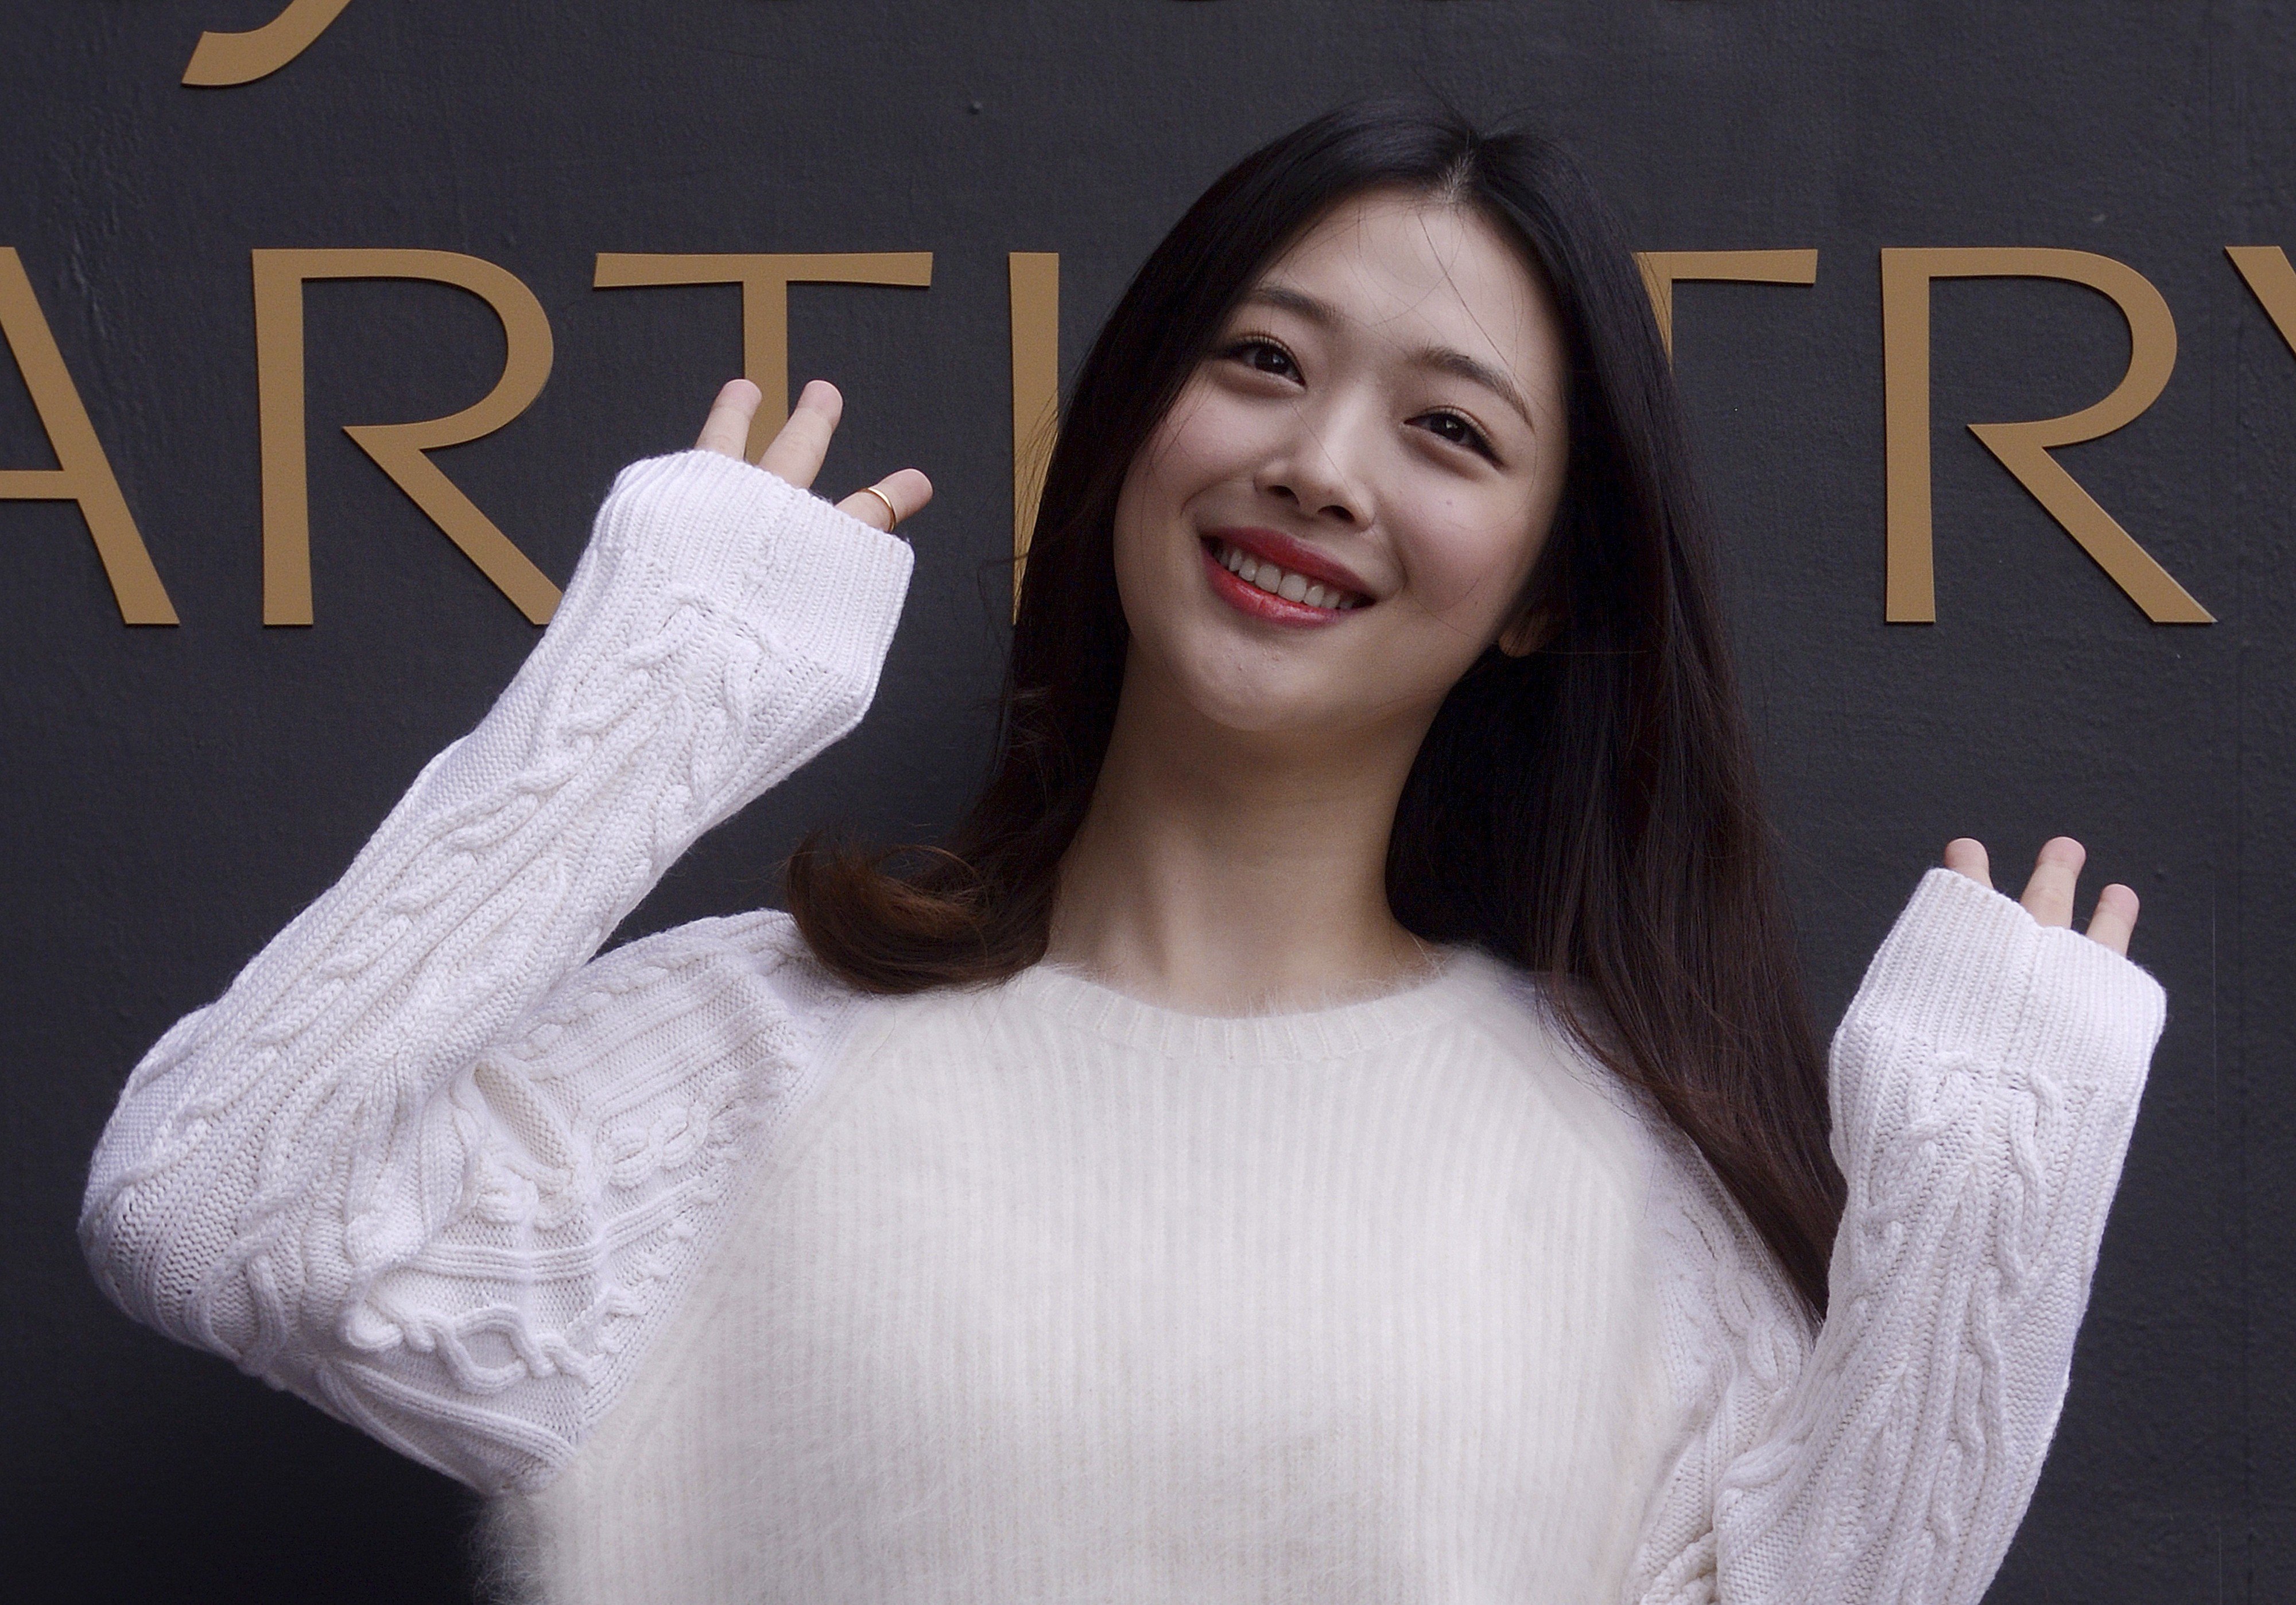 South Korean pop star and actress Sulli, seen posing for the cameras at an event in Seoul on September 30, 2015. Sulli was found dead at her home south on Monday, October 14. Photo: Newsis via AP